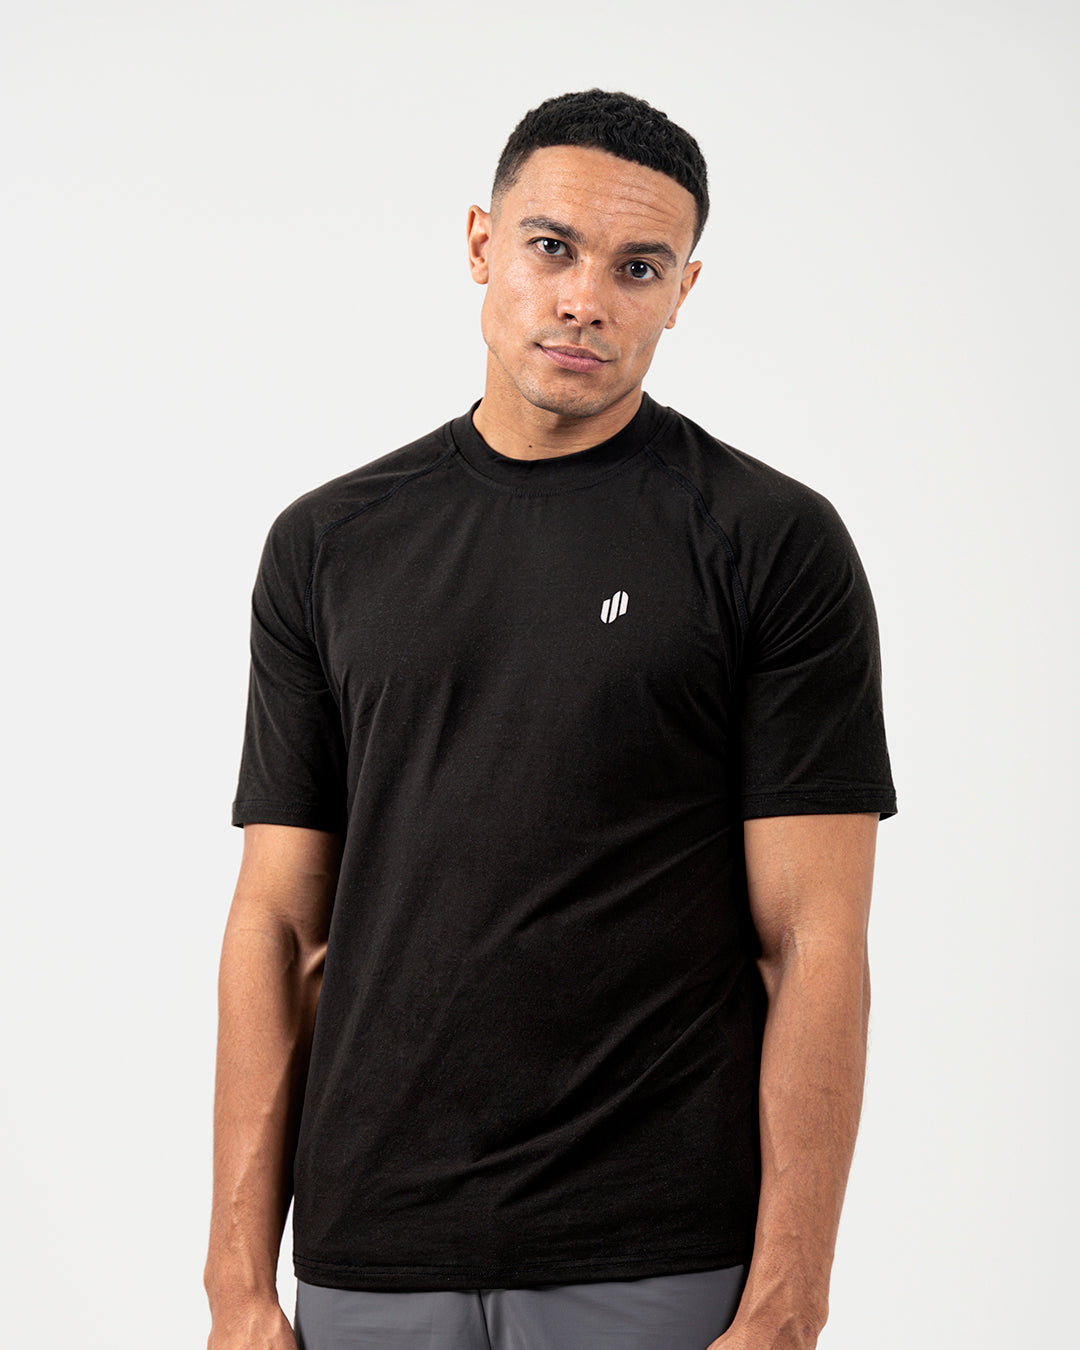 EE:S05 - Soft Touch T-Shirt - Black